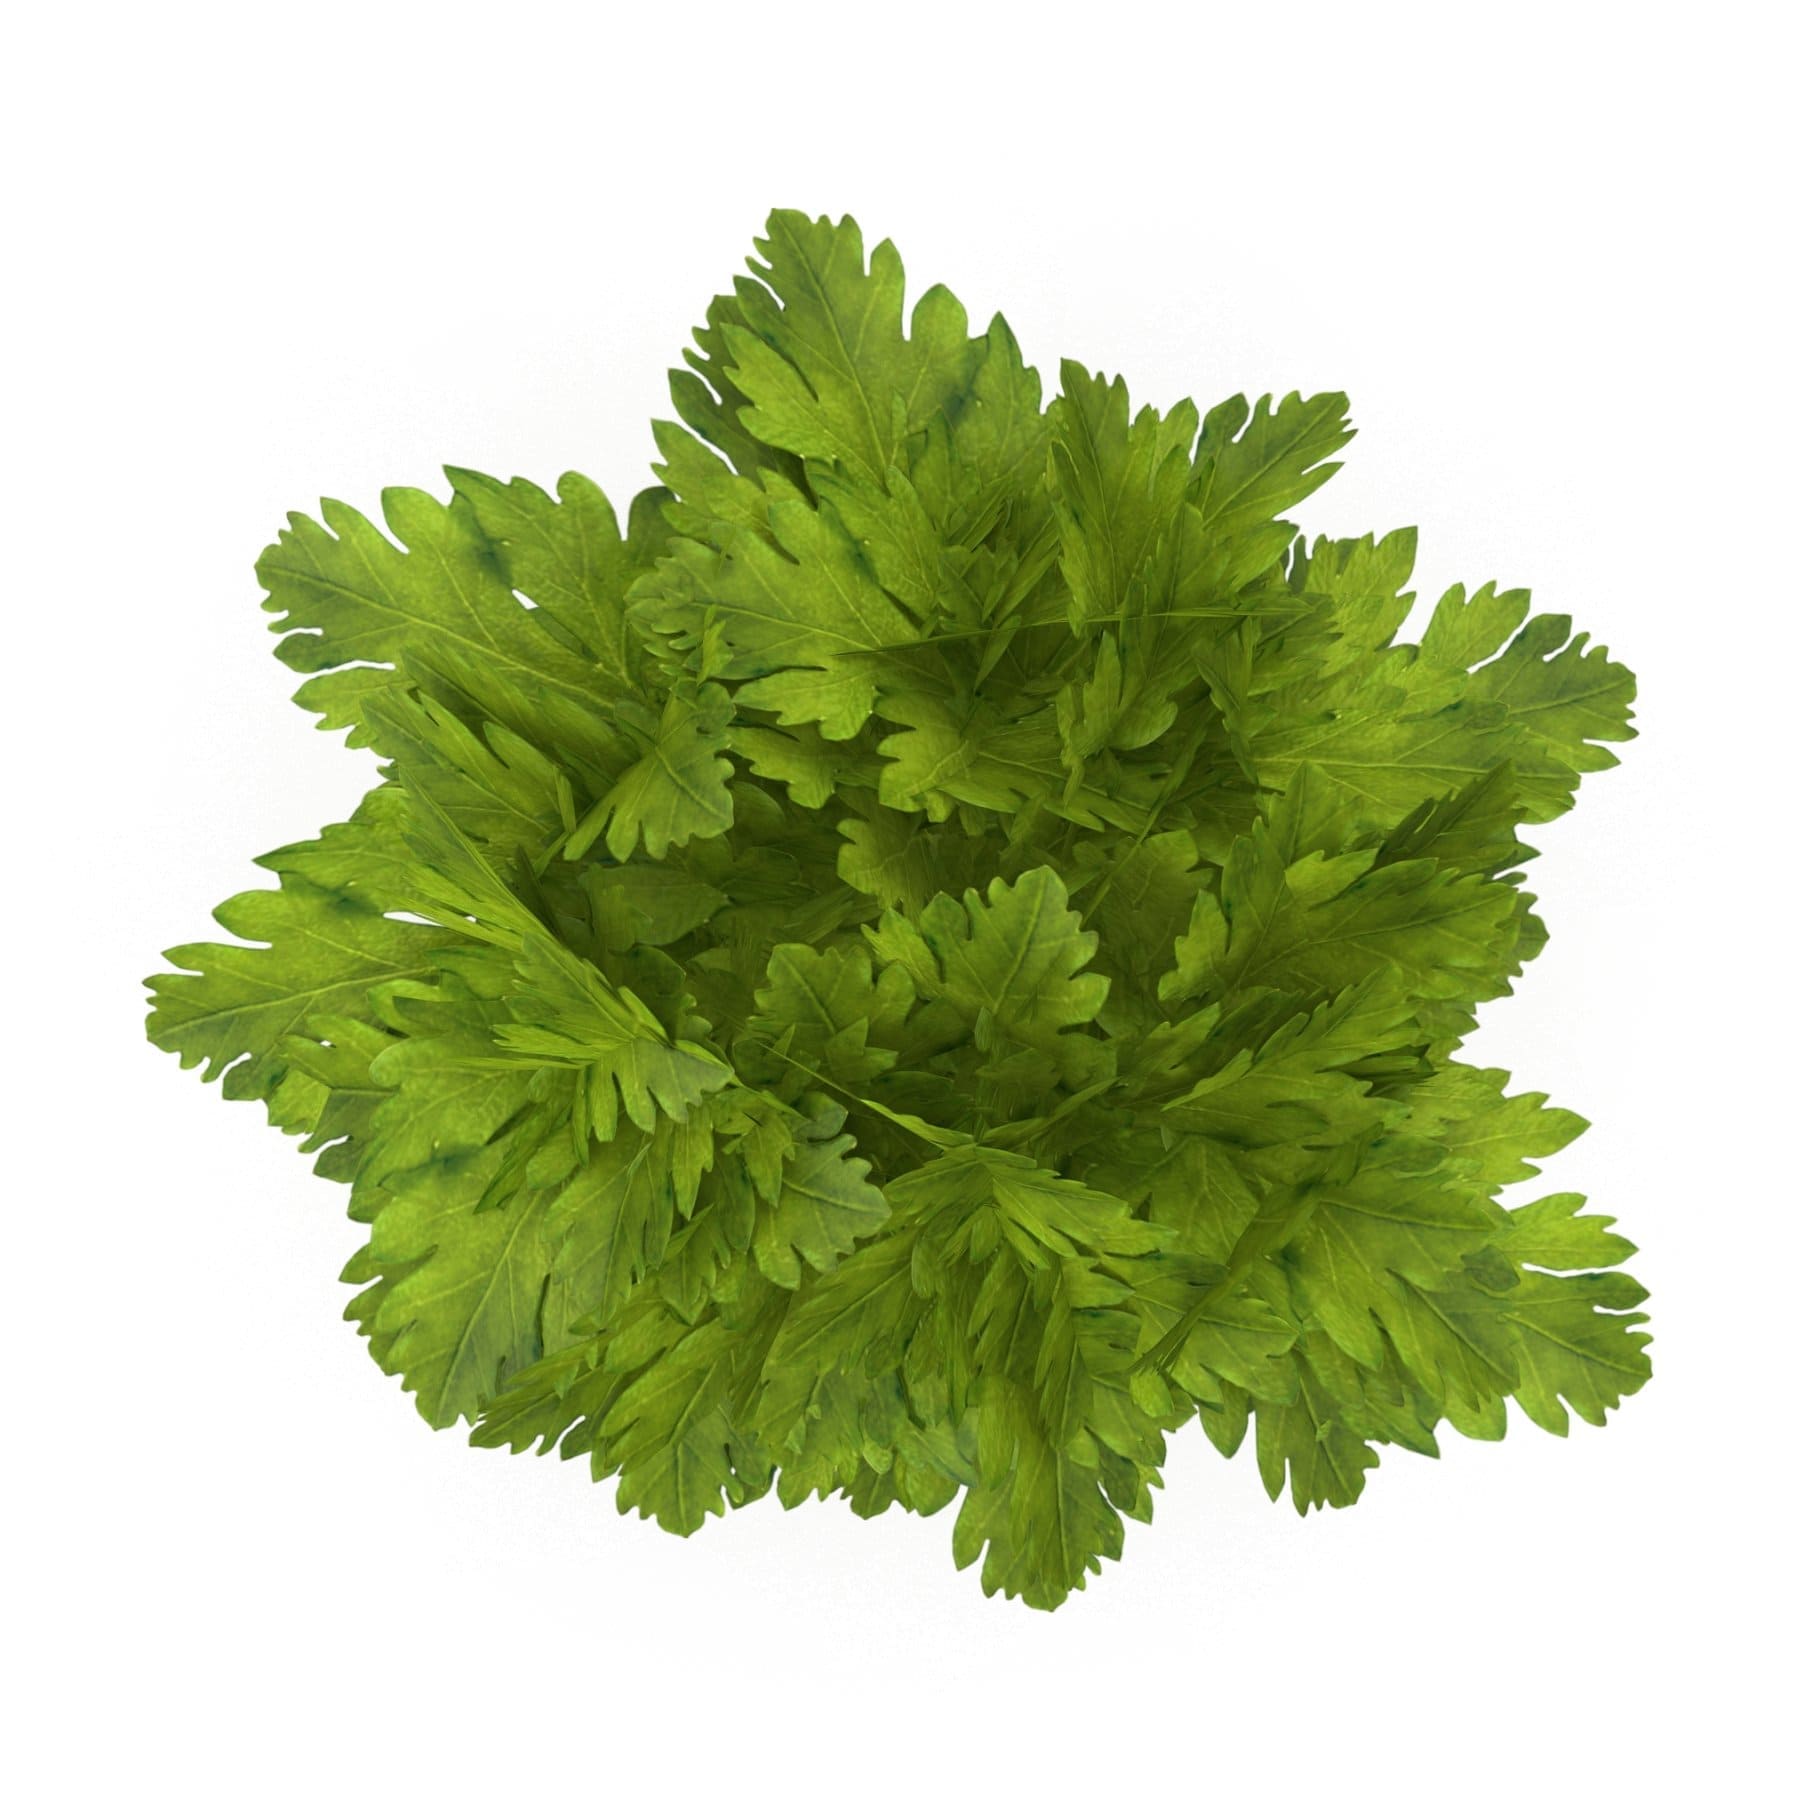 A bunch of celery, just the leaves.